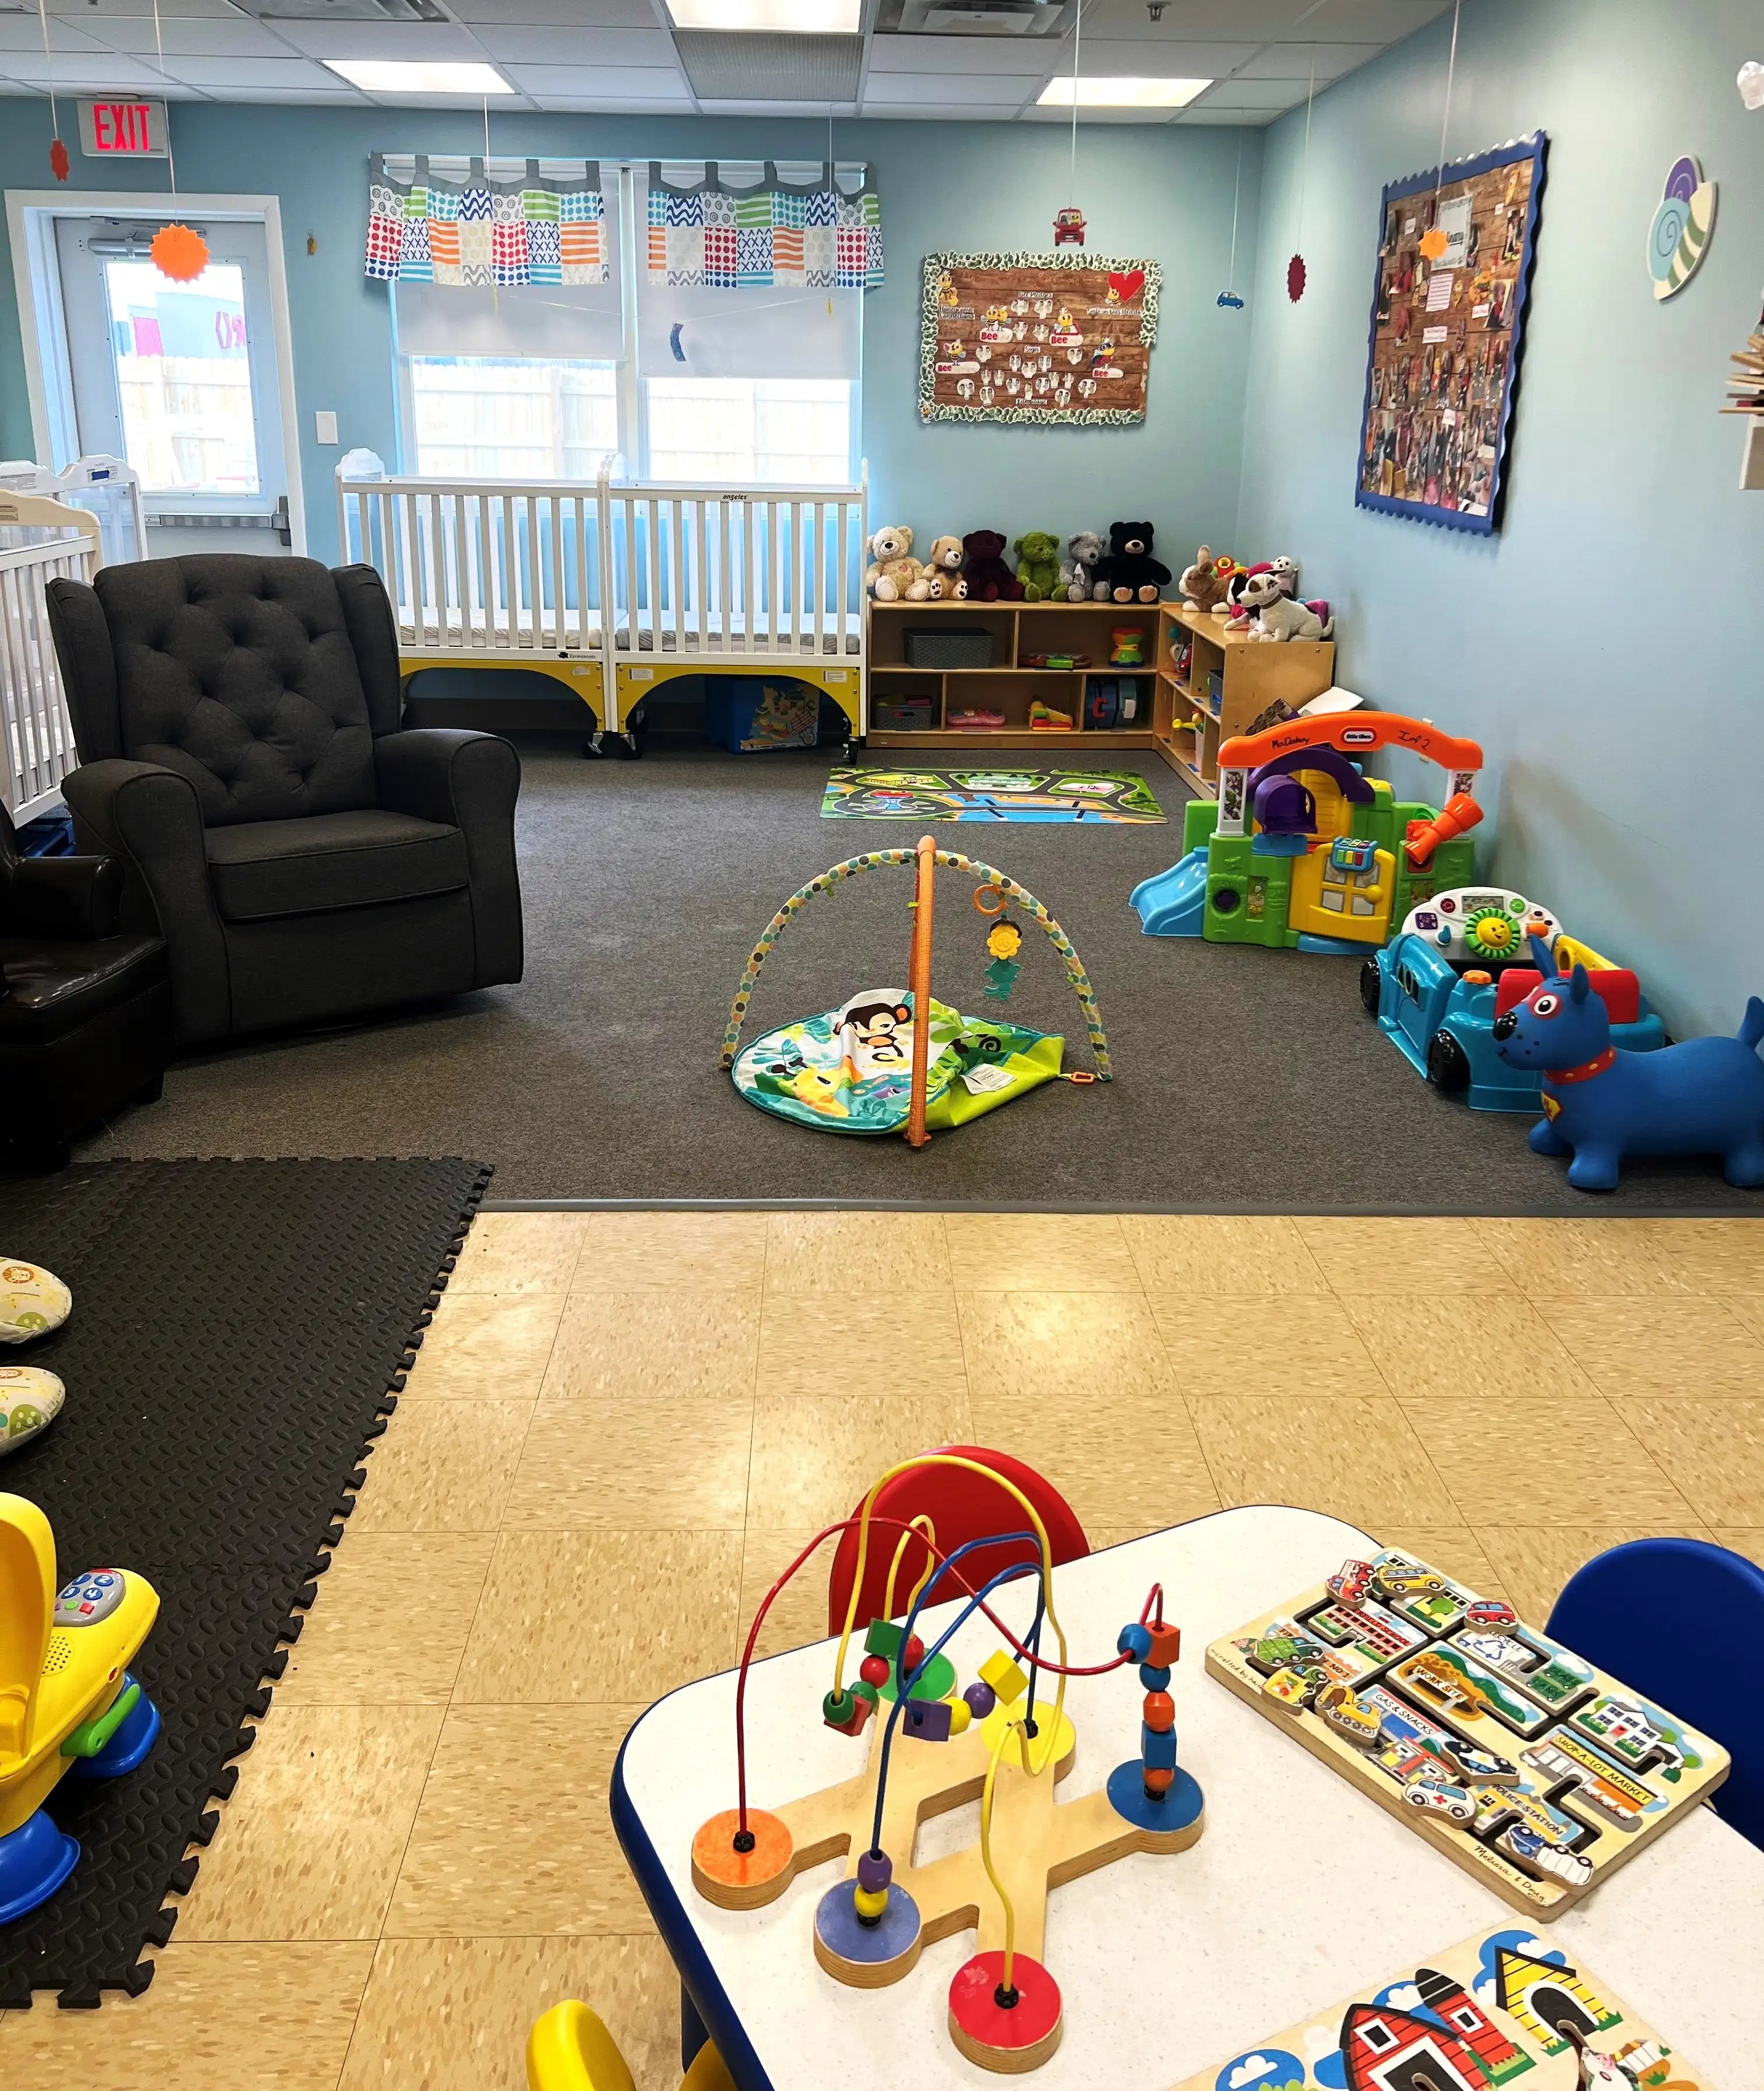 Imagination Station Alden offers top-tier daycare and early childhood education for infants to pre-k.3